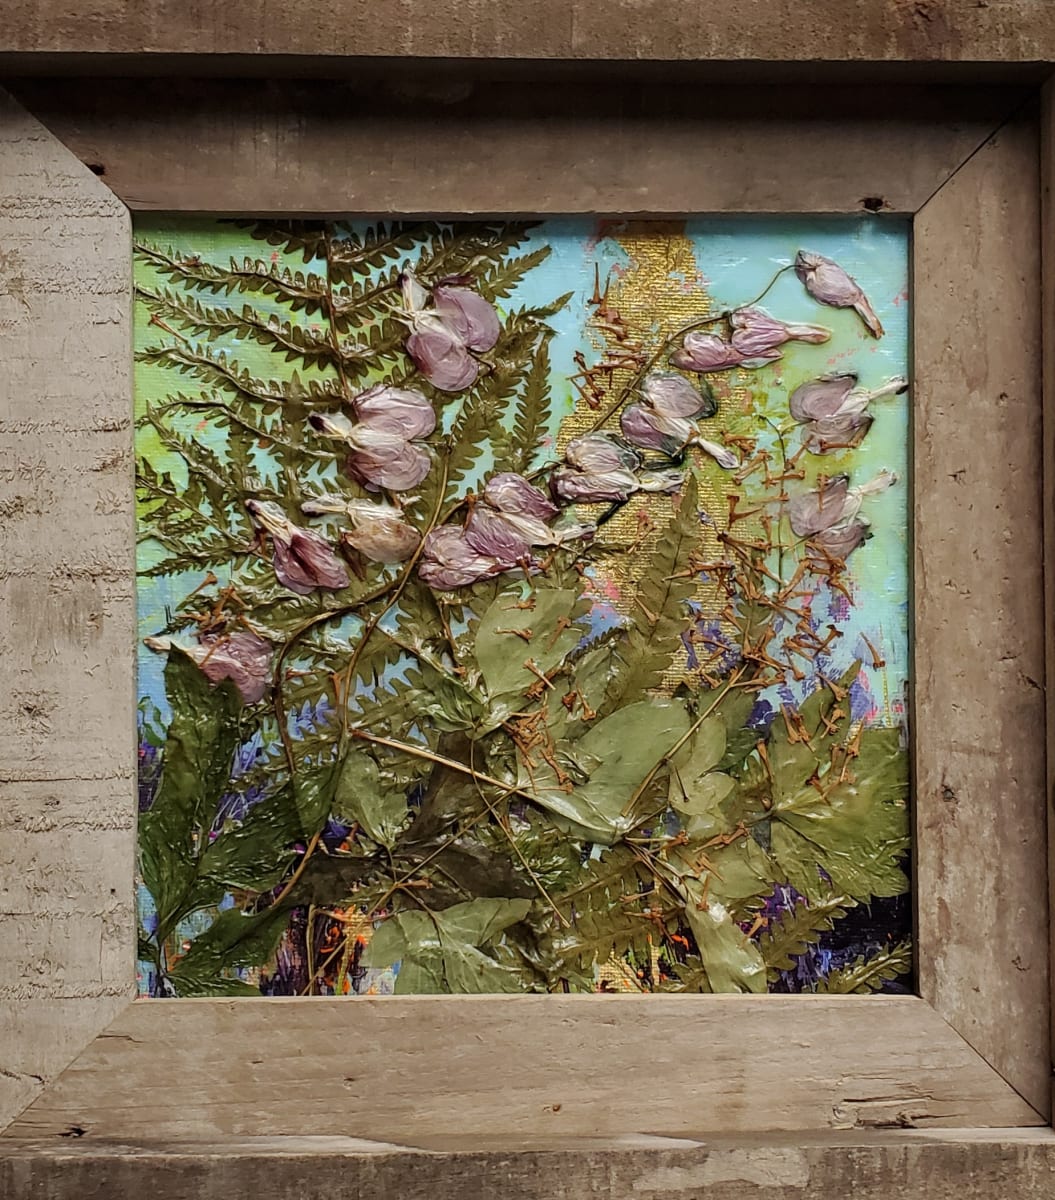 OG Weedy Garden #2 by Jill Seiler  Image: Weedy Garden Life.  Real pressed flowers on acrylic with gold leaf. 